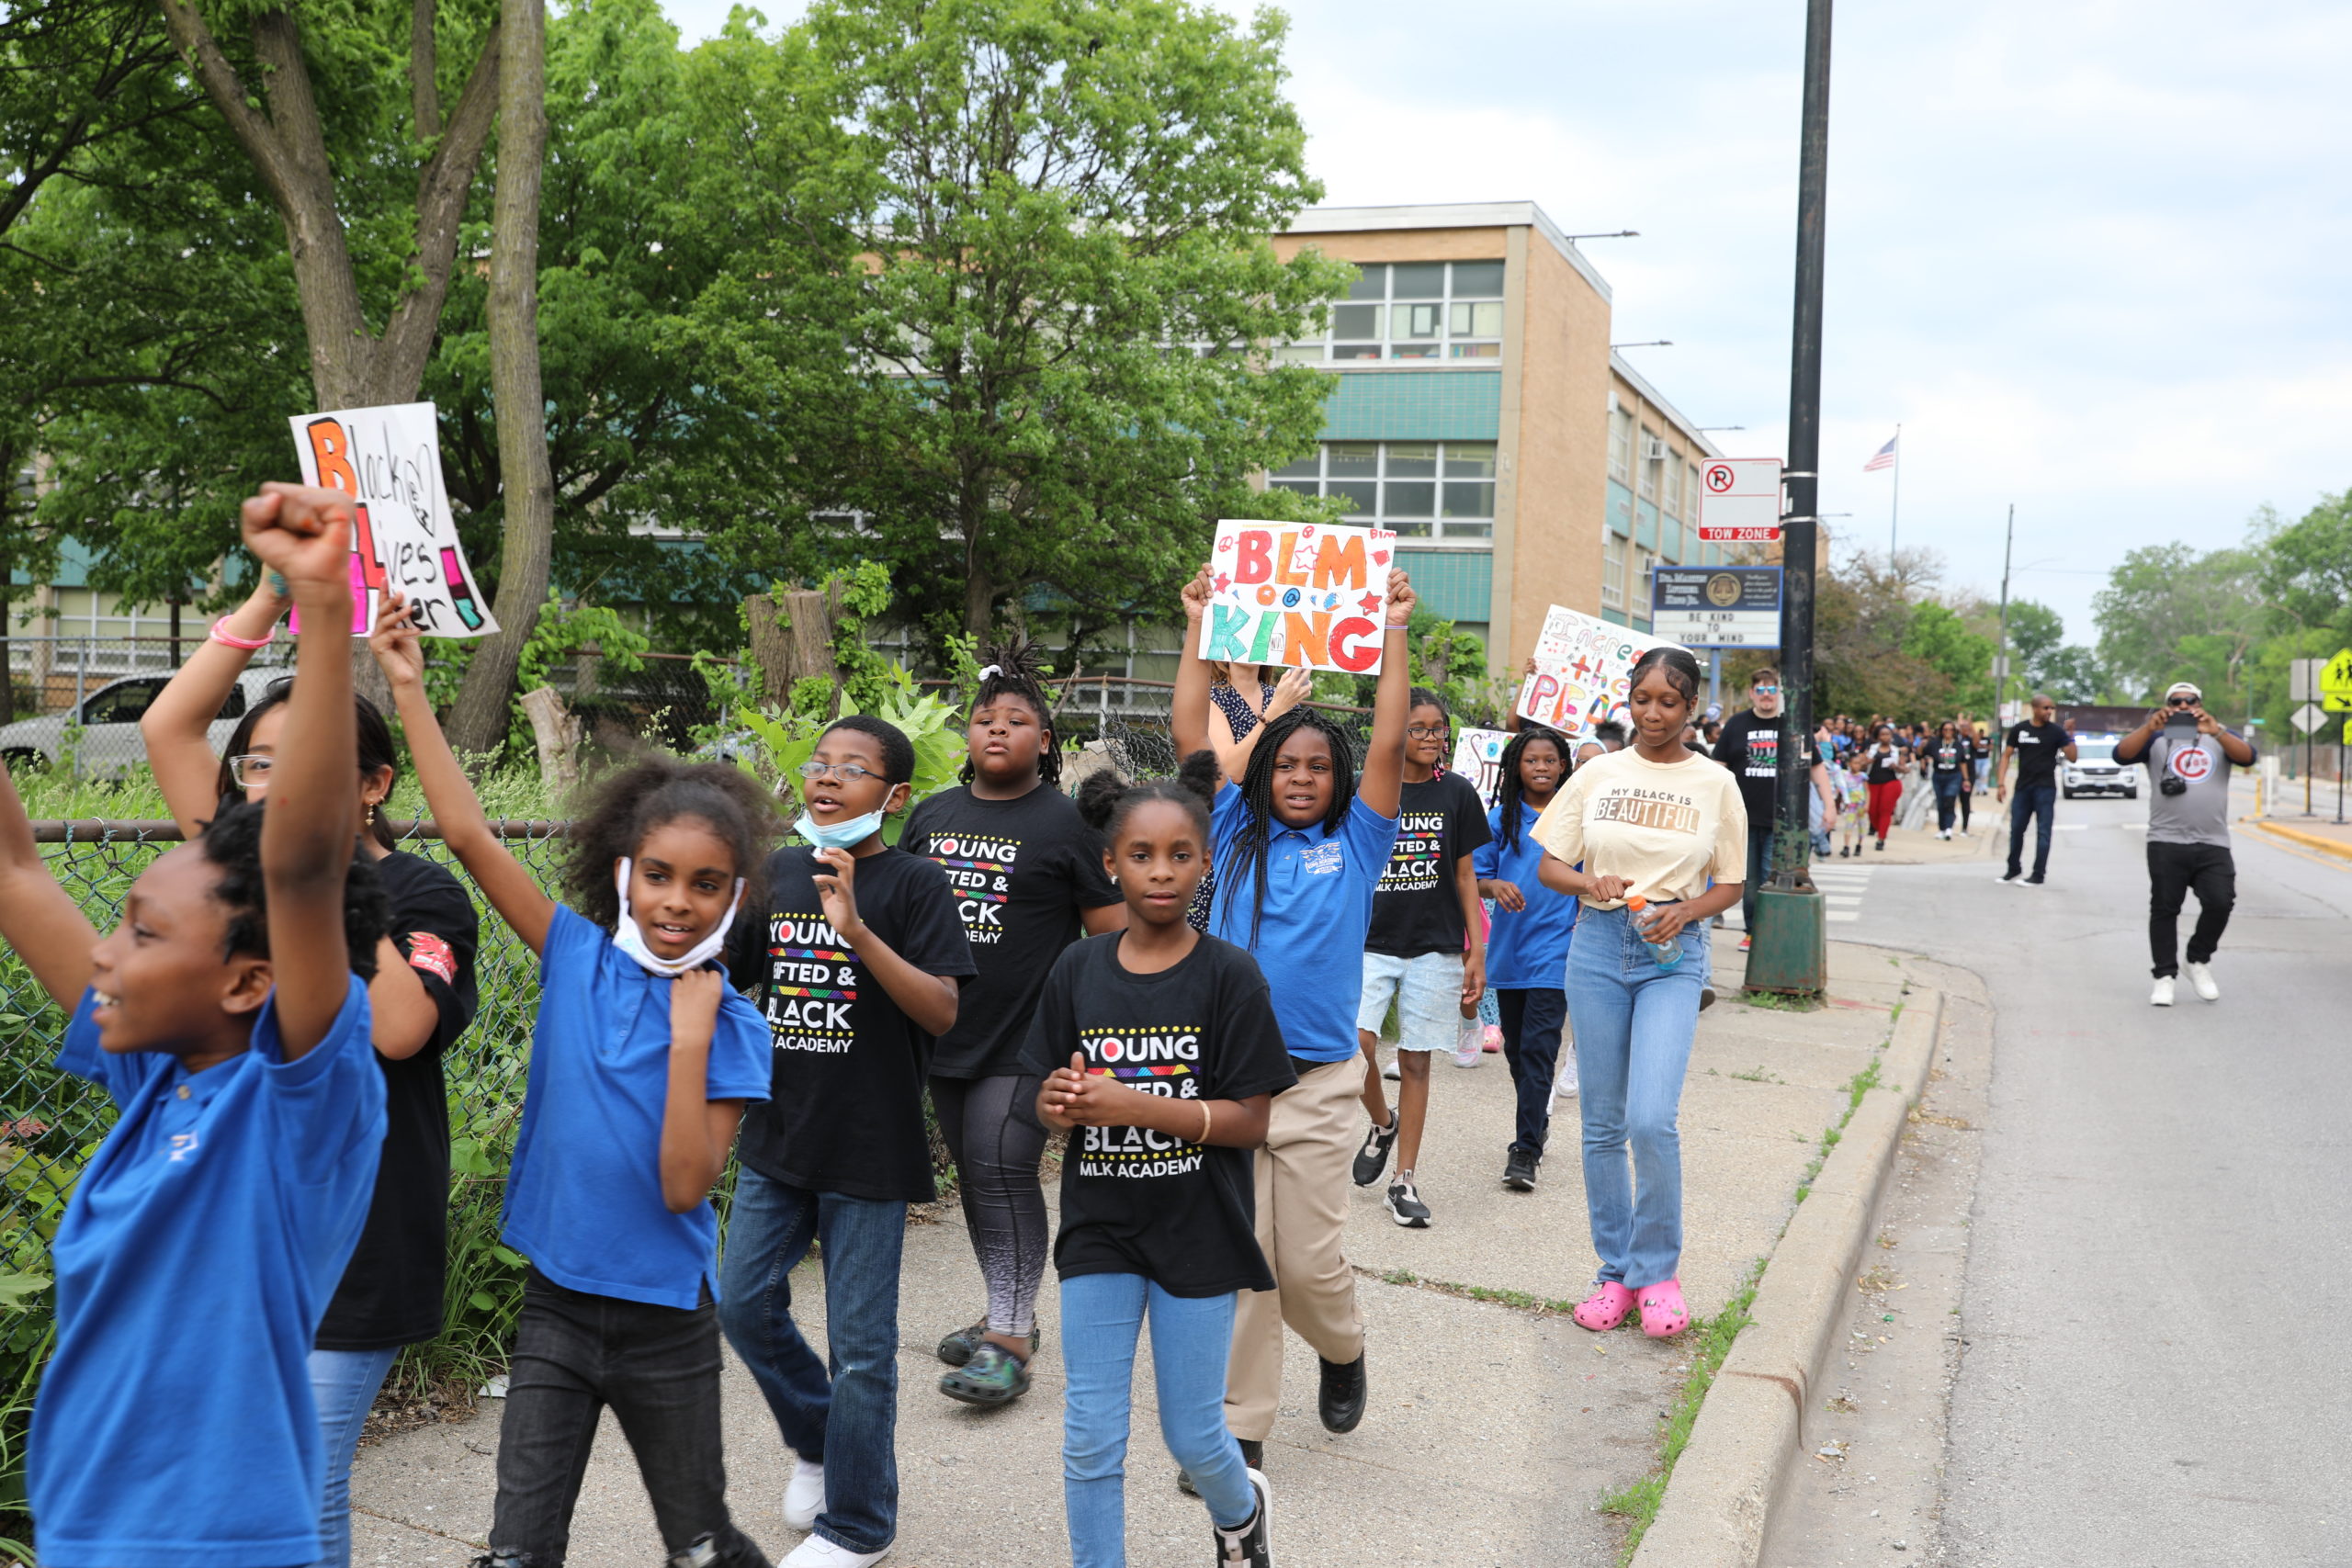 Students marching for Black Lives Matter